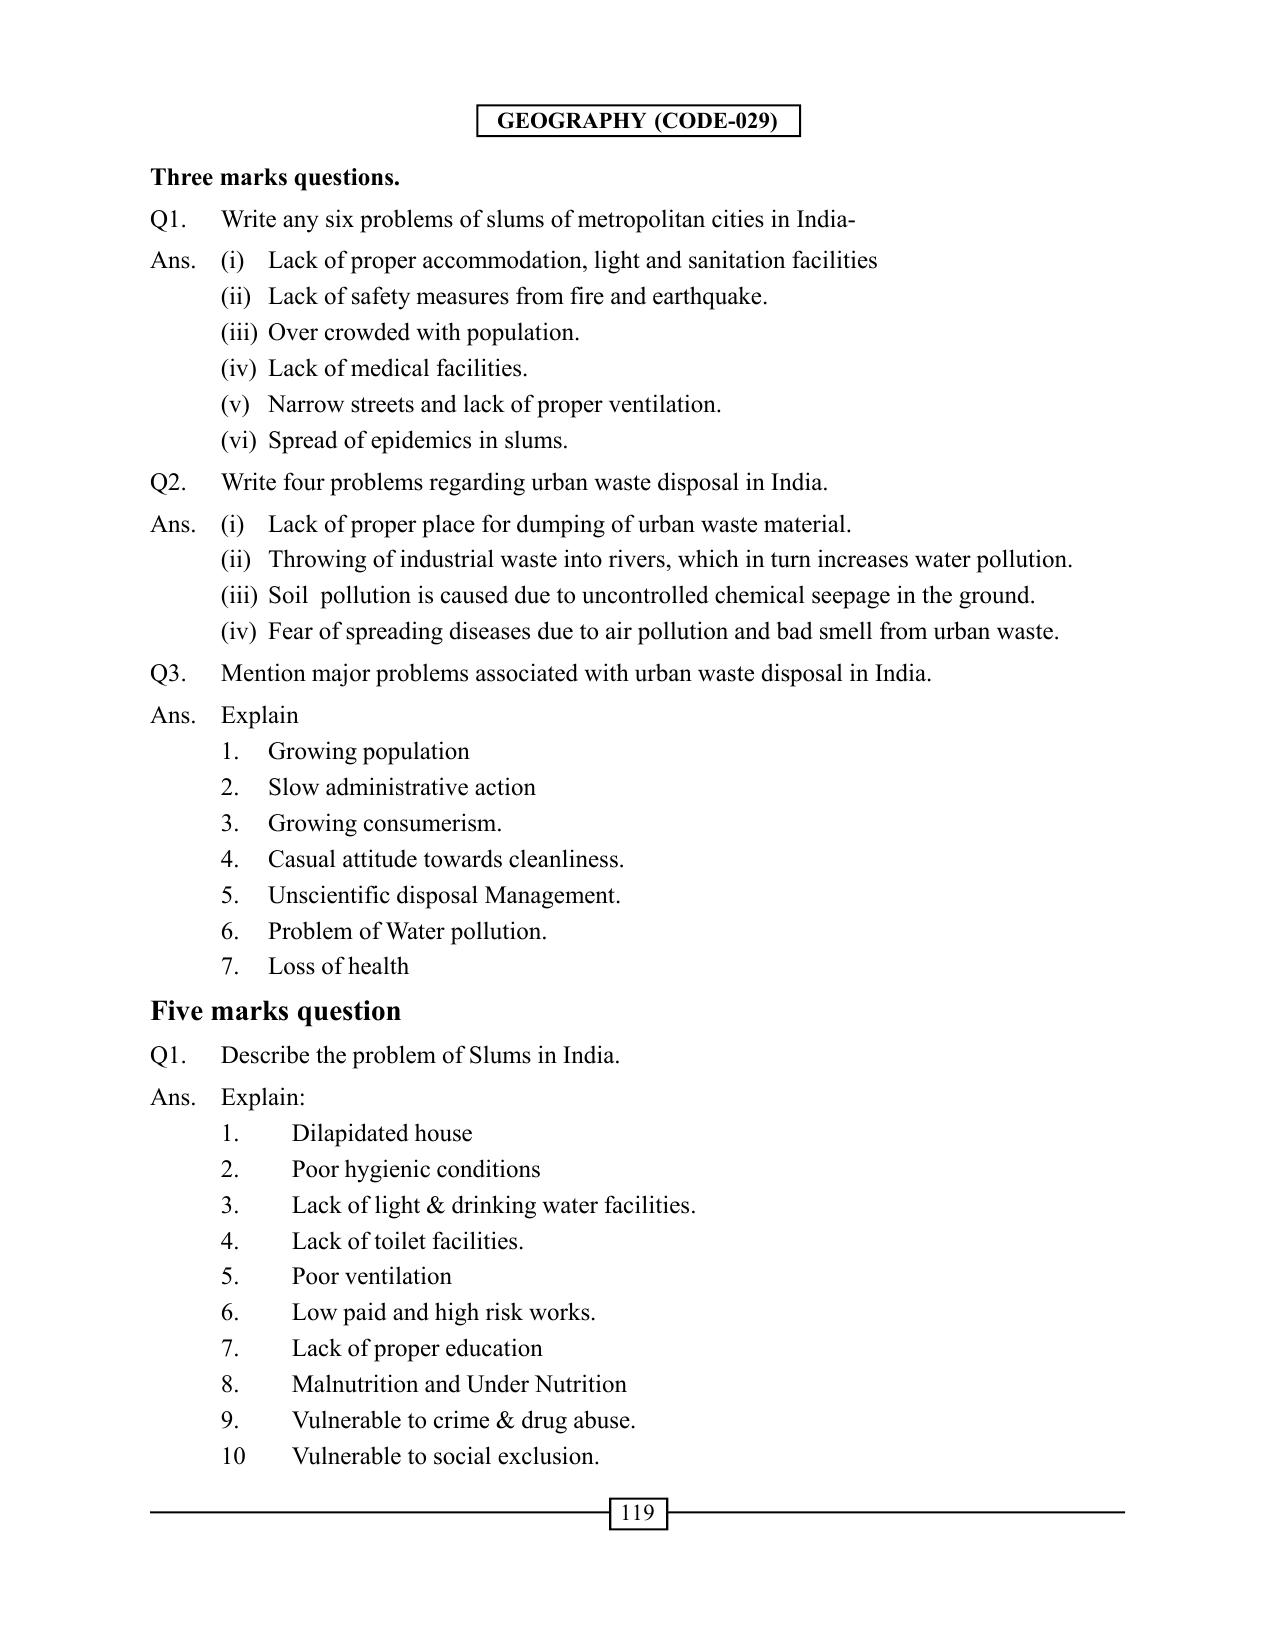 CBSE Worksheets for Class 12 Geography Geographical Perspective on Selected Issues and Problems - Page 6